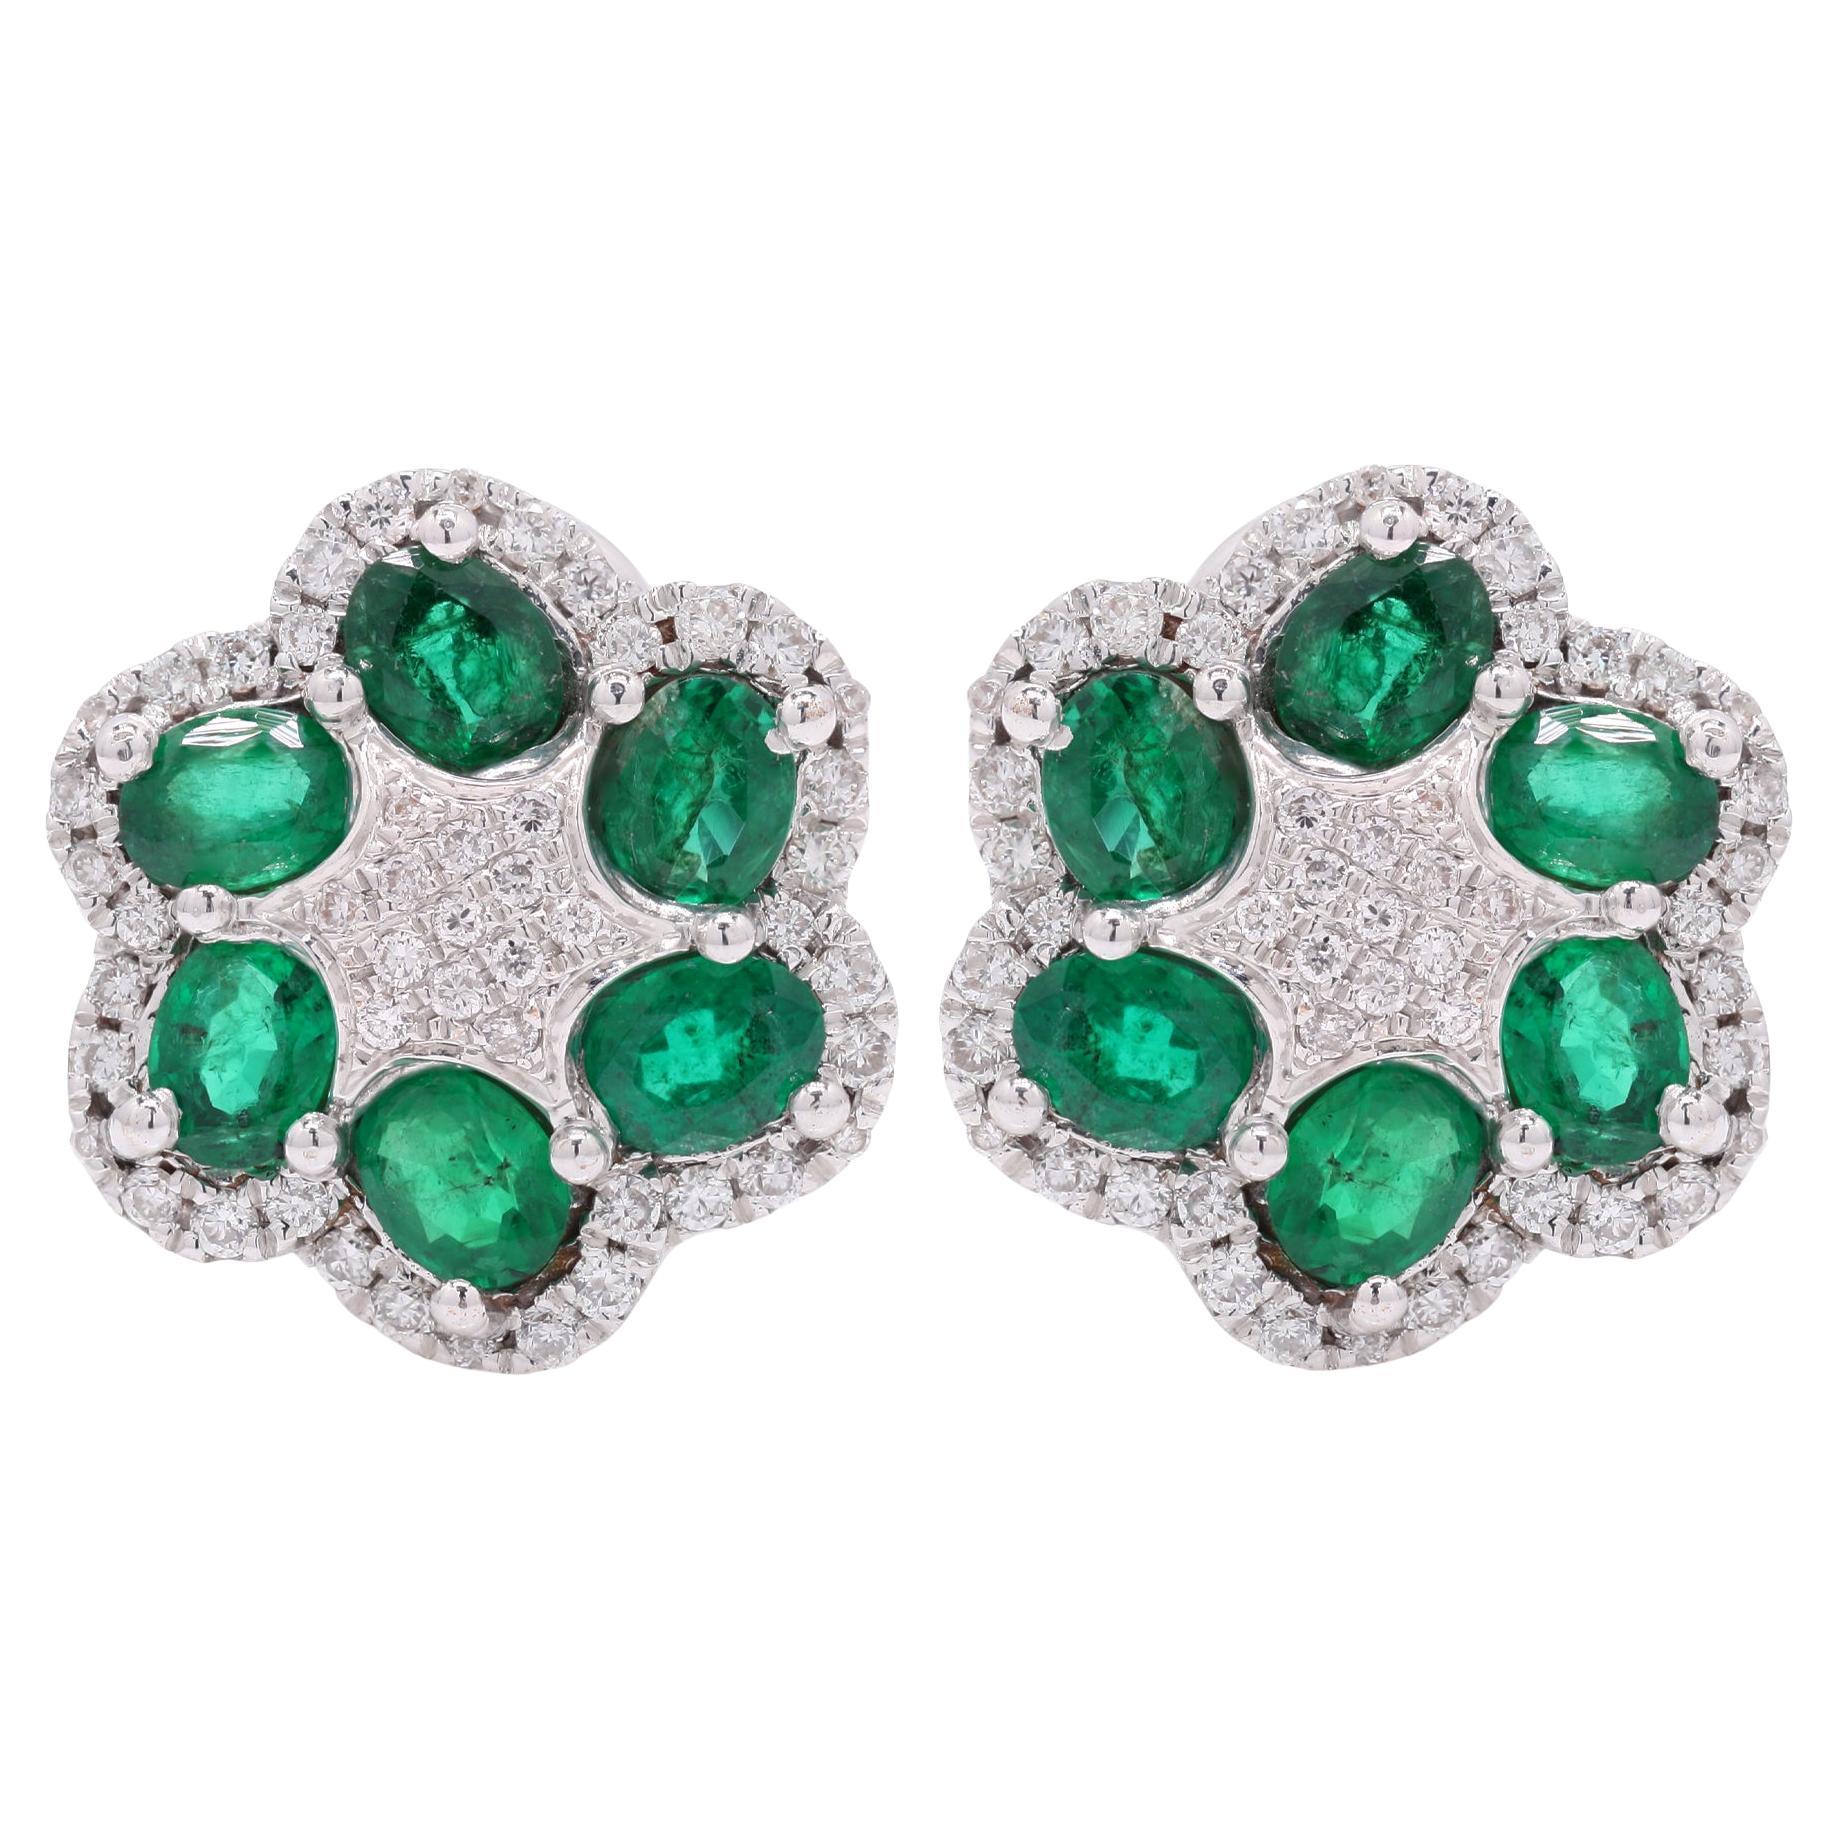 Startling Statement Emerald and Diamonds Clip on Stud Earrings in 14K White Gold